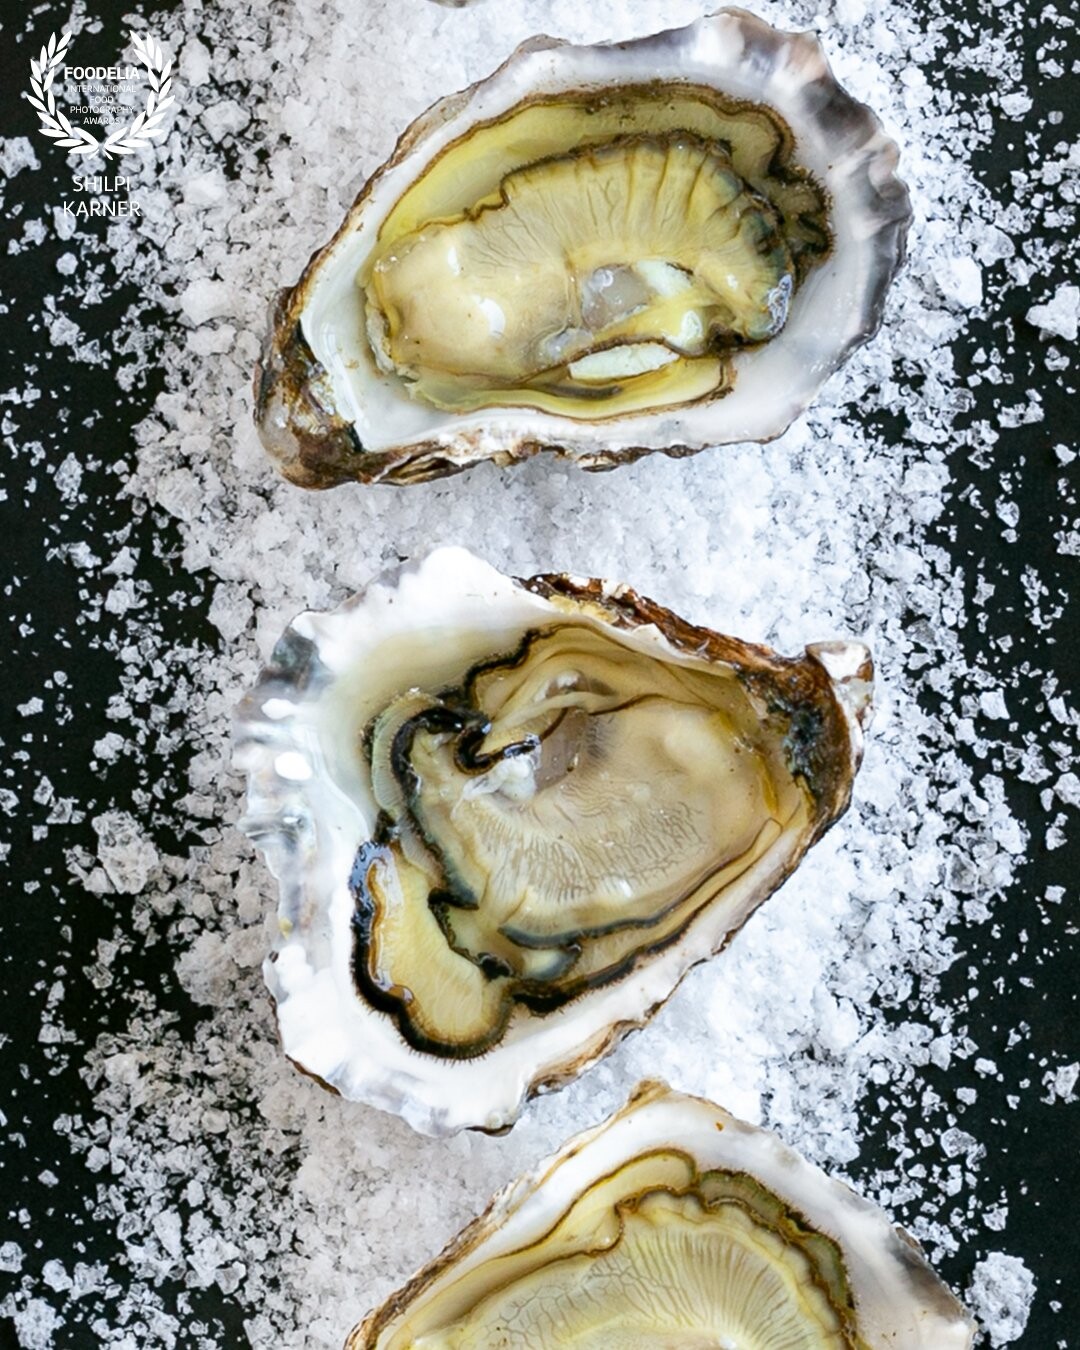 These native rock oysters from the Nambucca River estuary south of Coffs Harbour are stunning!! Sydney rock oysters are world renowned for their rich and creamy taste, and those that flourish in the Nambucca River – known as an oyster ‘sweet spot’, are quite likely some of the best oysters you will ever have the pleasure to devour. The Nambucca is blessed with a very clean river system, fed from highly mineralised water that comes straight off the mountains, which is why the shells are so white and the flavour so unique. <br />
I was nervous and excited to shoot these oysters as it was my first time! With a few tips from our Oyster sommelier I was able to style these gems in a simple way allowing their natural textures and colours to shine. By tilting the shell in different ways, I was also able to see how the light played off and when I was happy with the set up , I clicked this image with my 100mm lens.